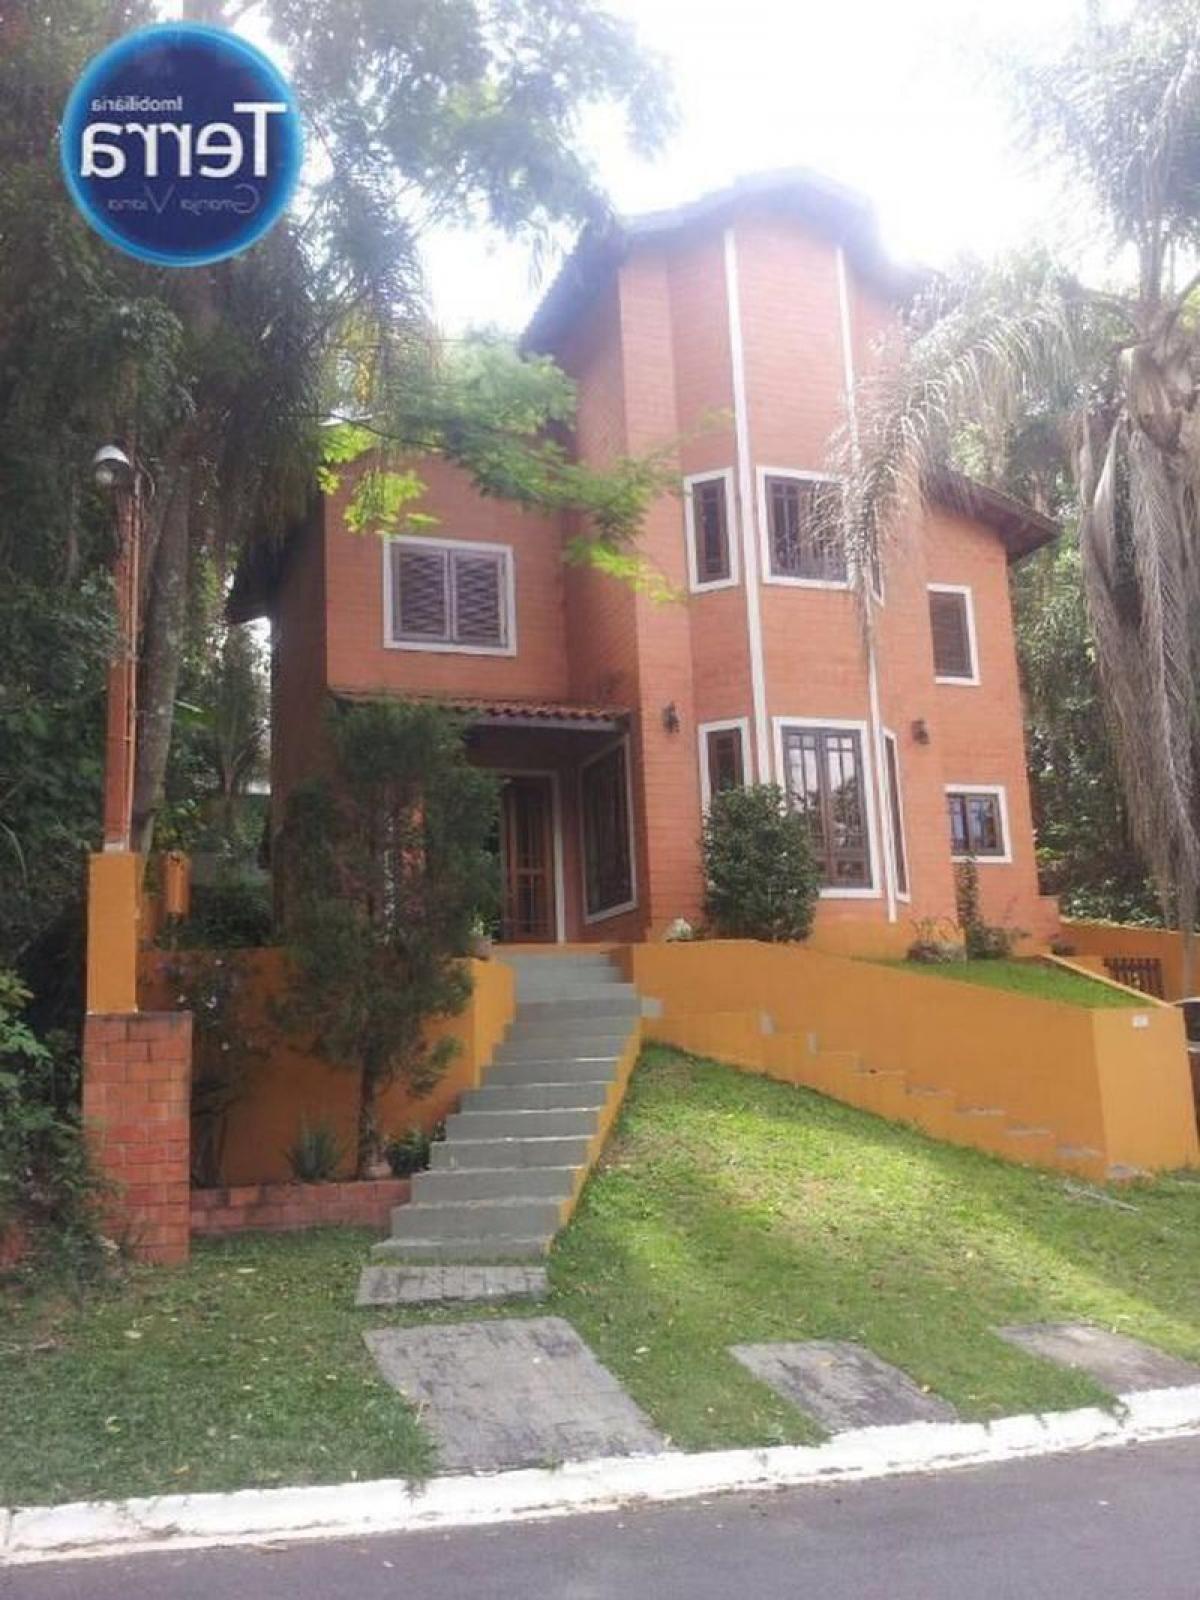 Picture of Home For Sale in Itapevi, Sao Paulo, Brazil